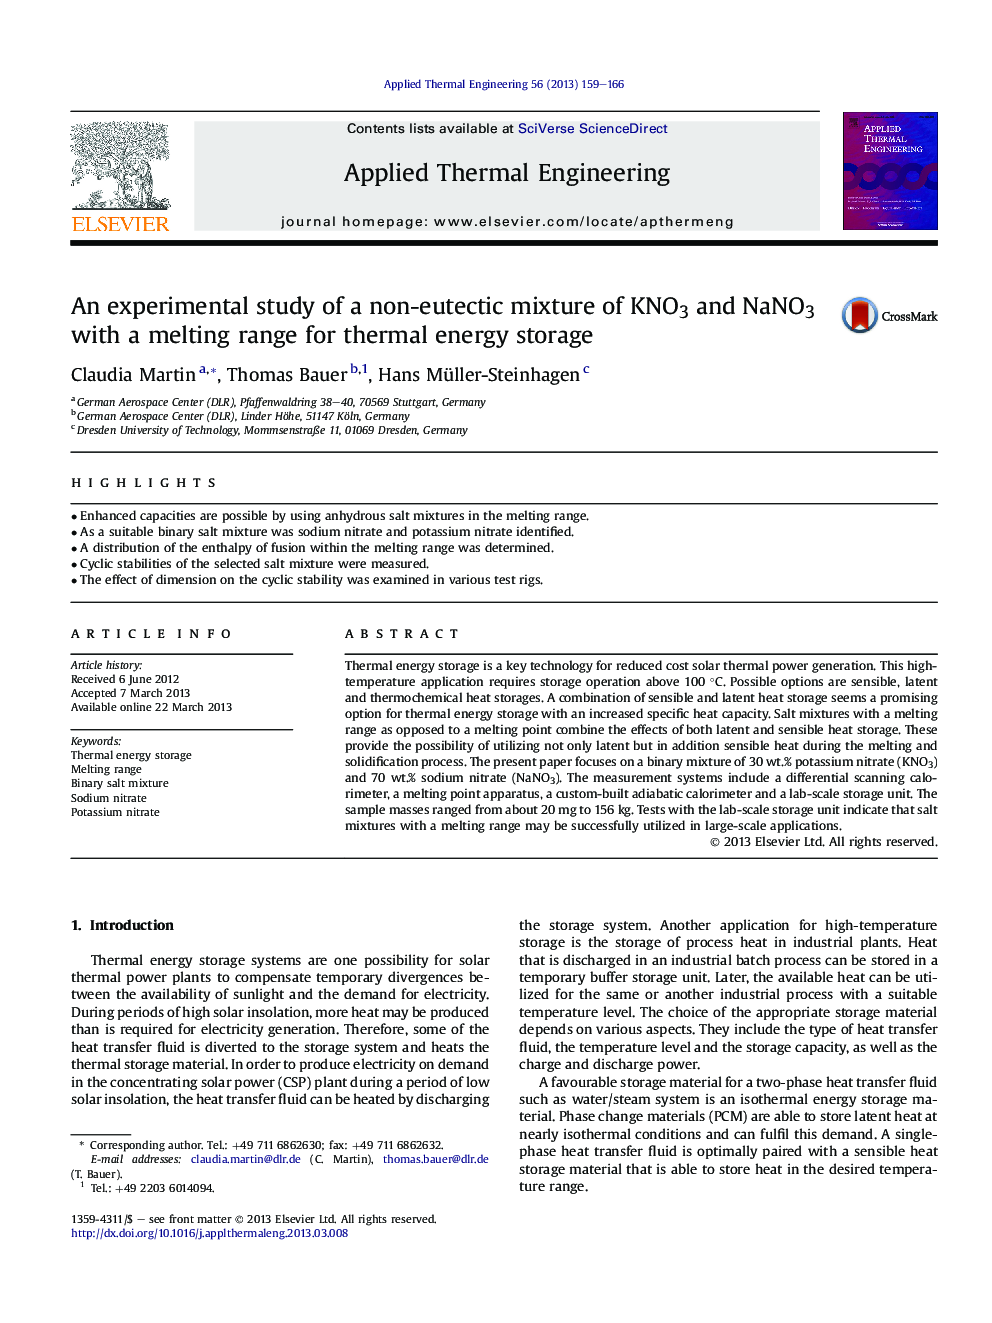 An experimental study of a non-eutectic mixture of KNO3 and NaNO3 with a melting range for thermal energy storage